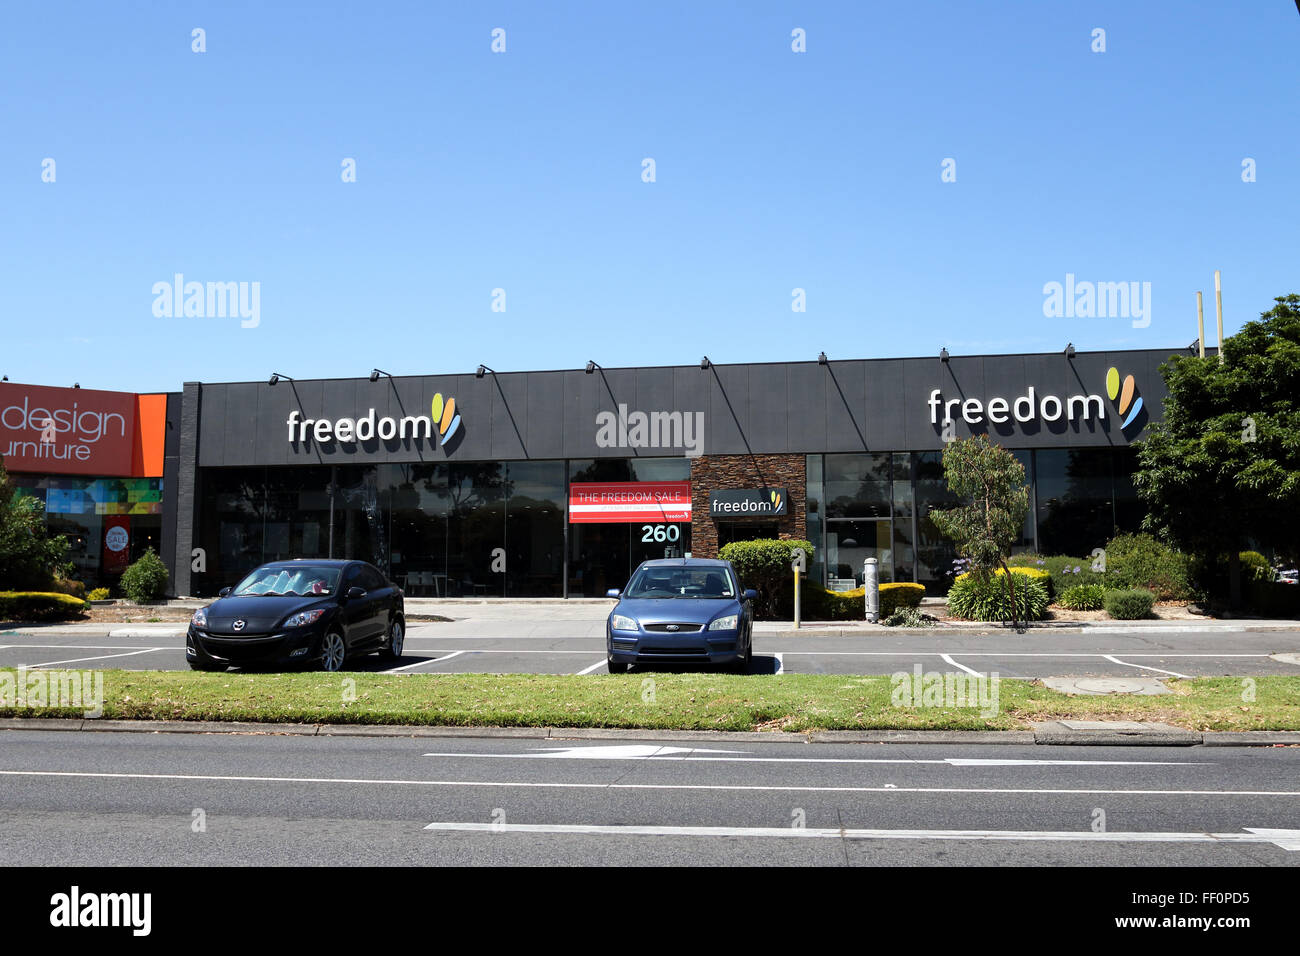 Freedom Furniture is a major furniture retailer in Australia and New Zealand Stock Photo